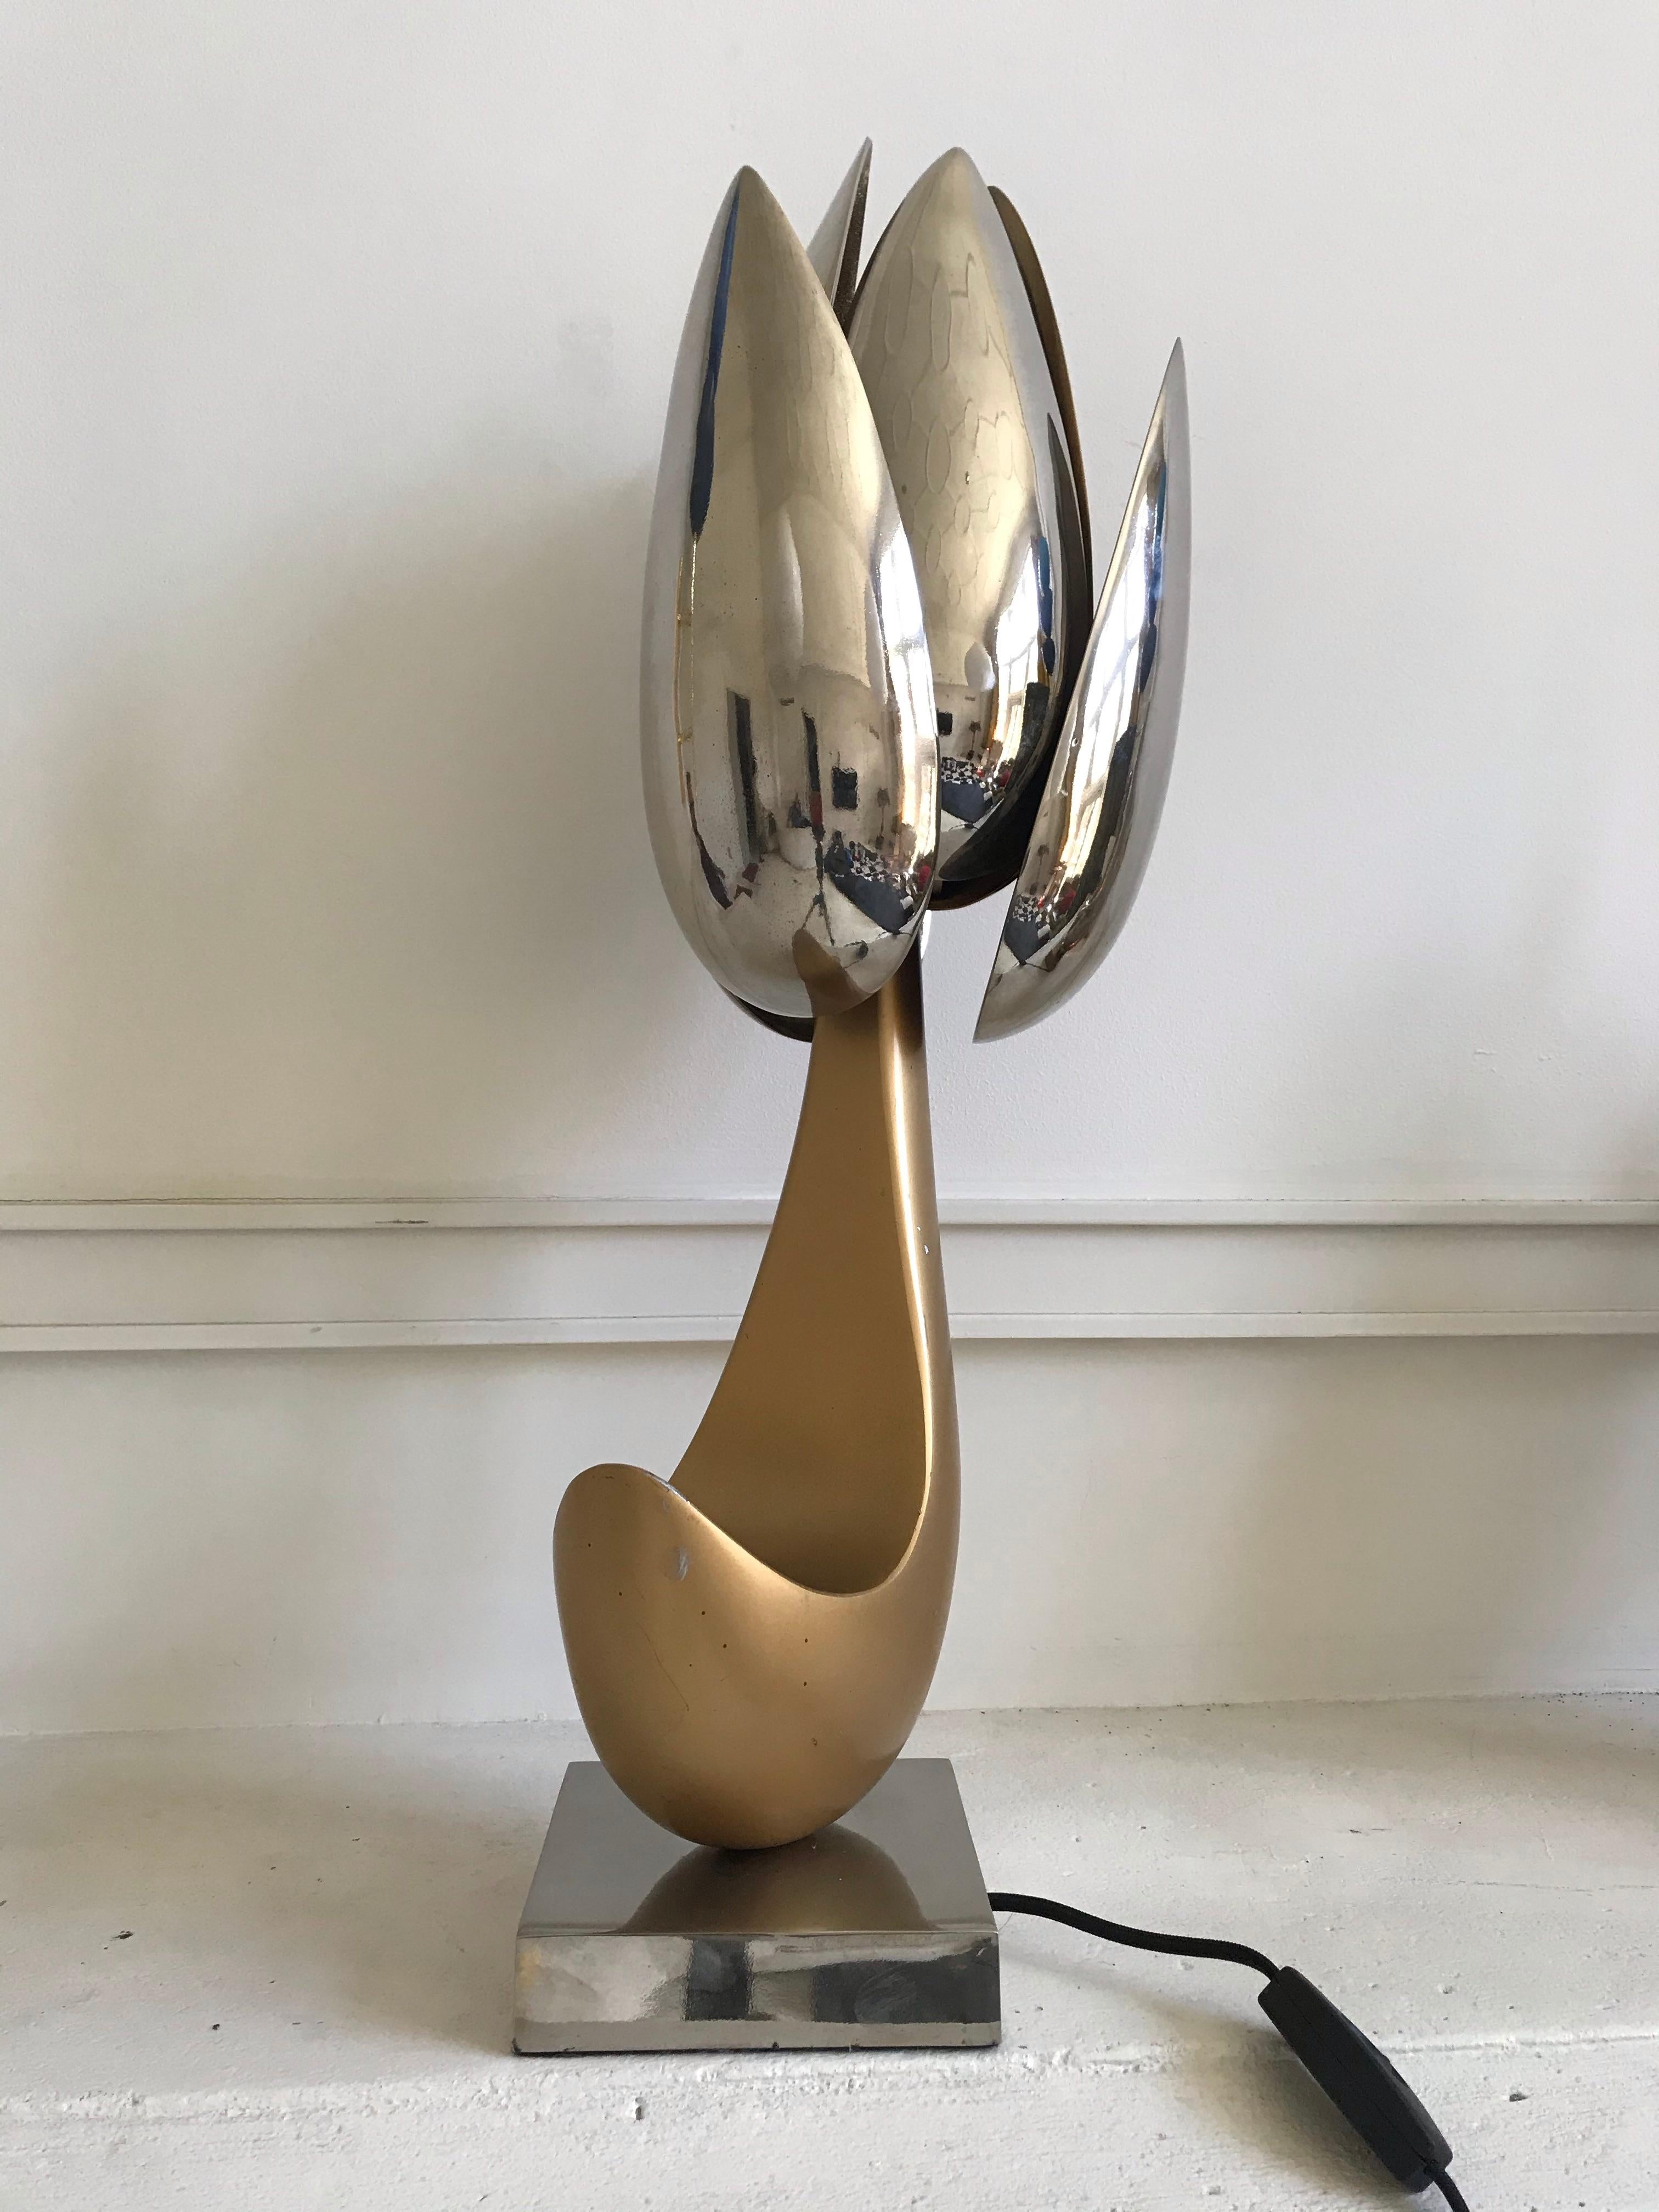 Brass and nickel-plated bronze table lamp by Michel Dumas for Maison Charles in the form of an abstract three petaled flower on a square polished nickel base.